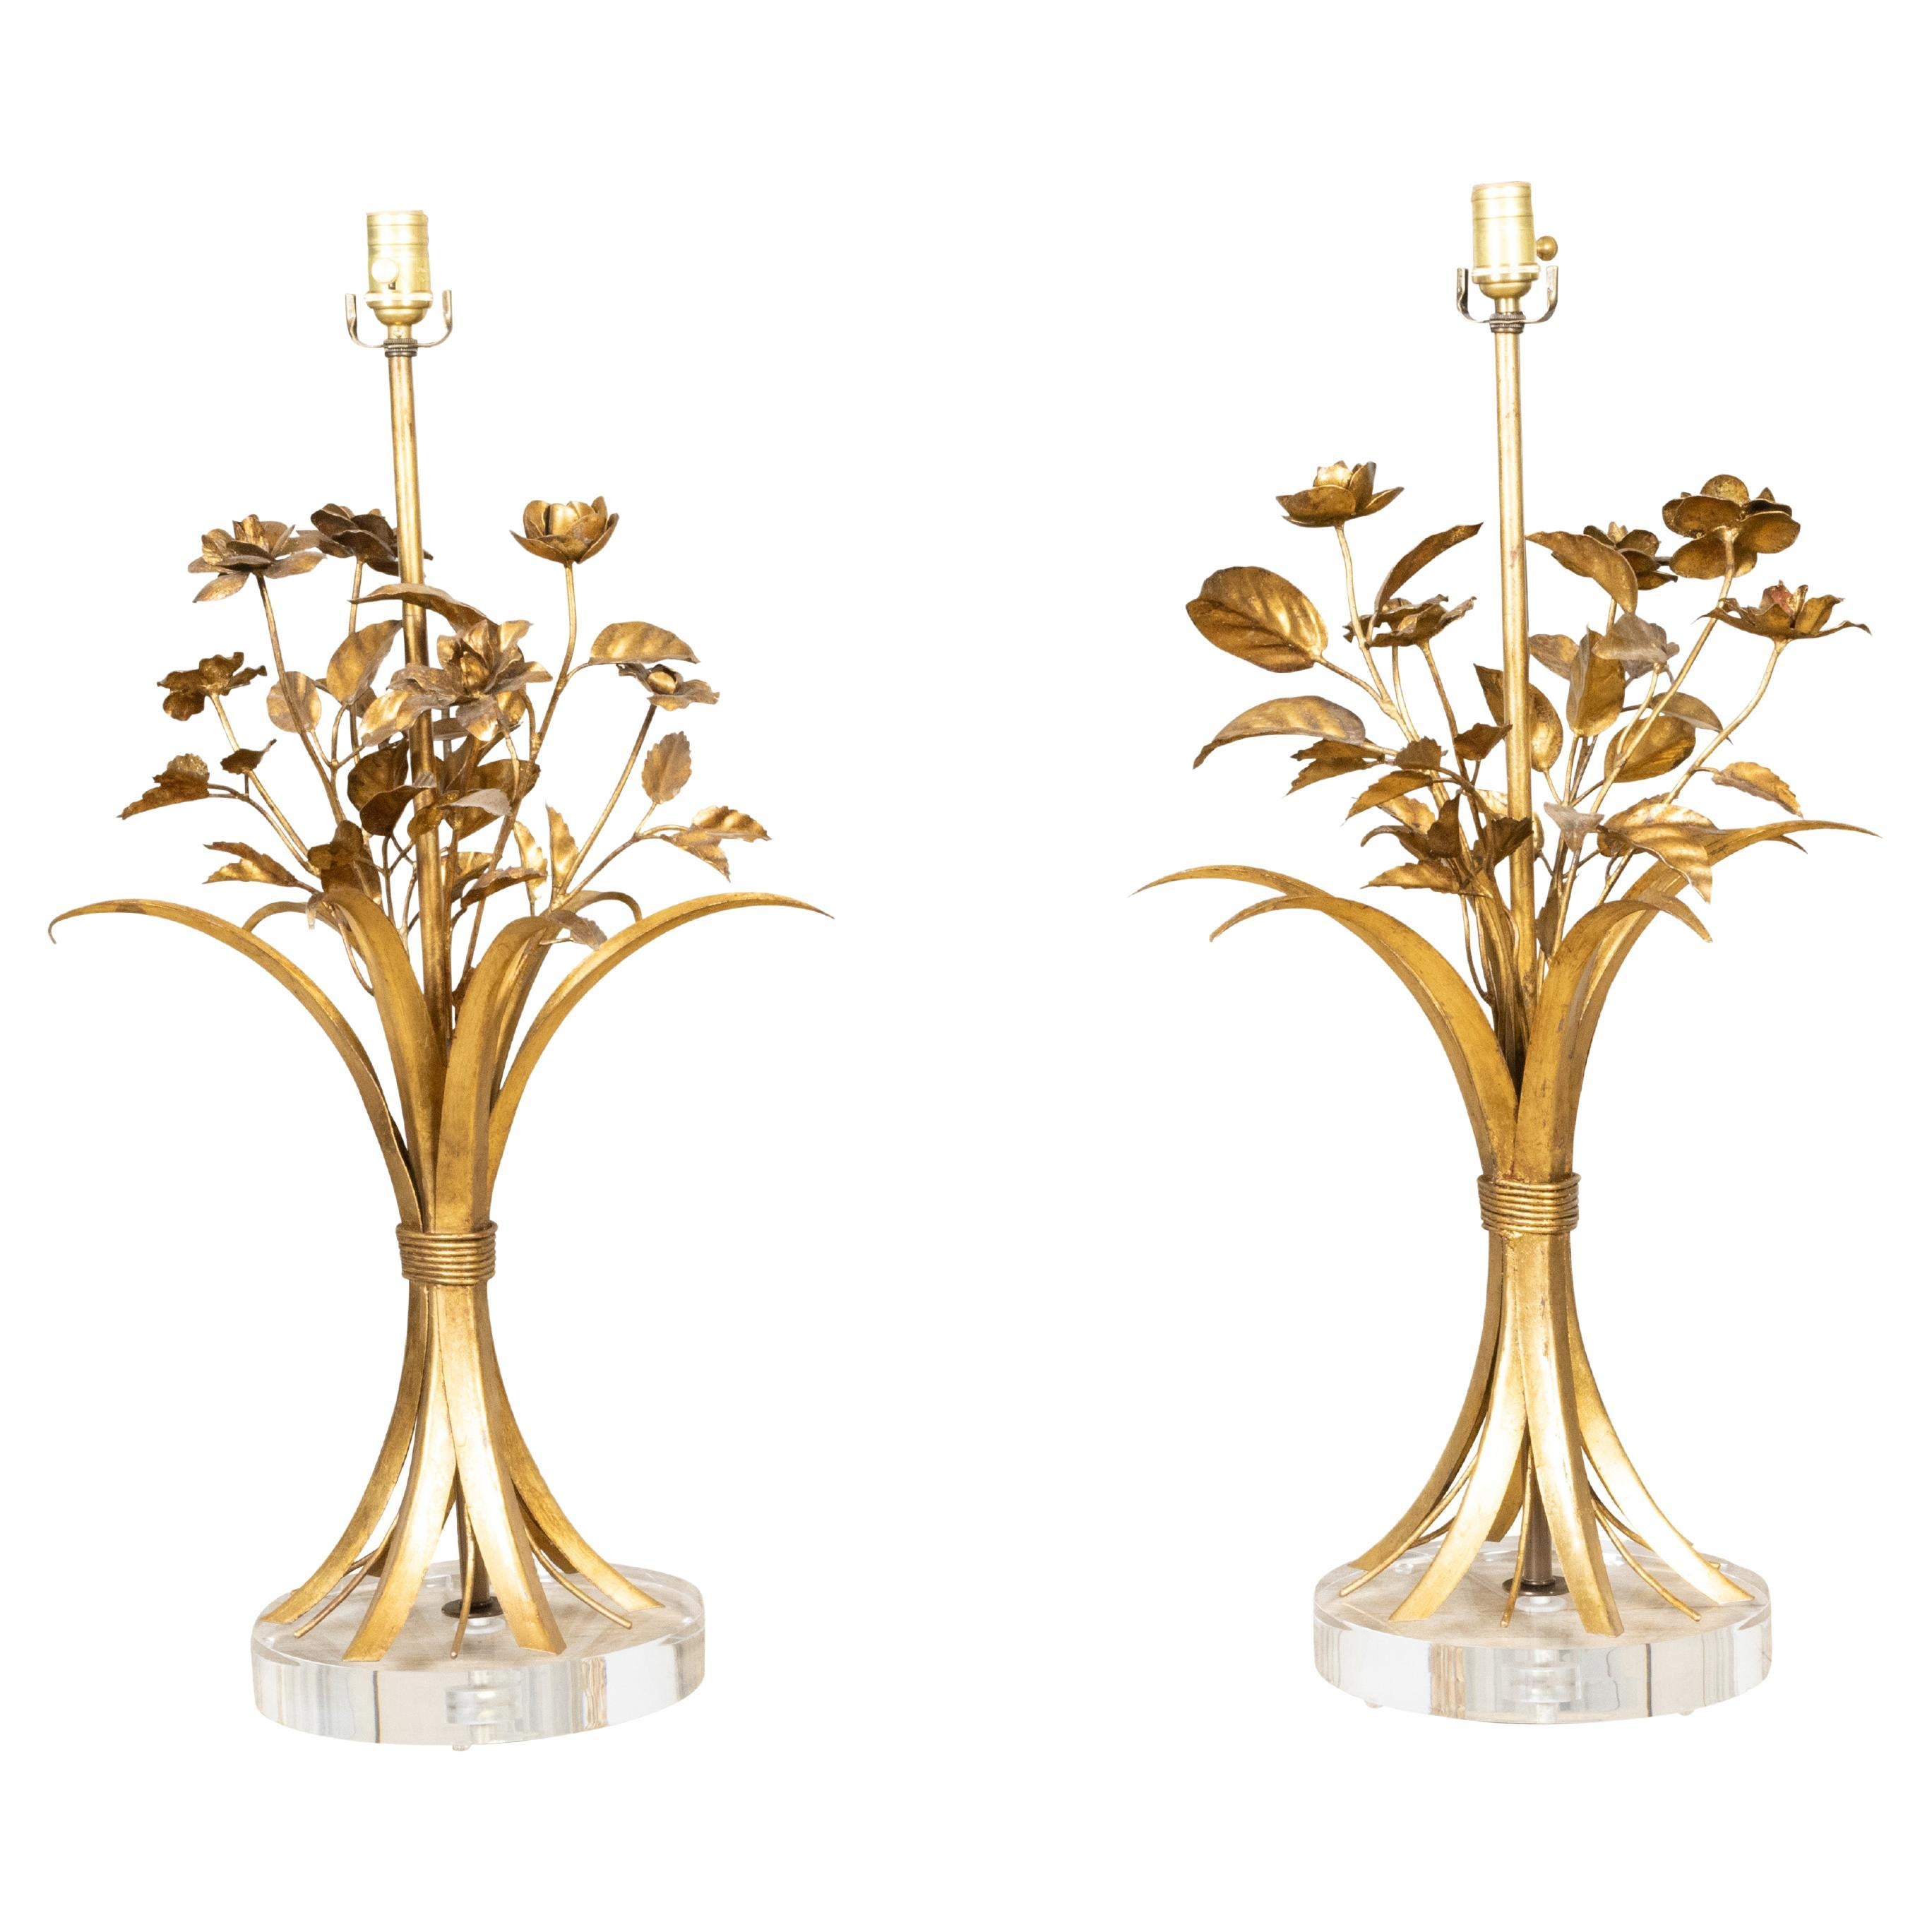 Pair of Italian Midcentury Table Lamps Depicting Bouquets of Roses on Lucite